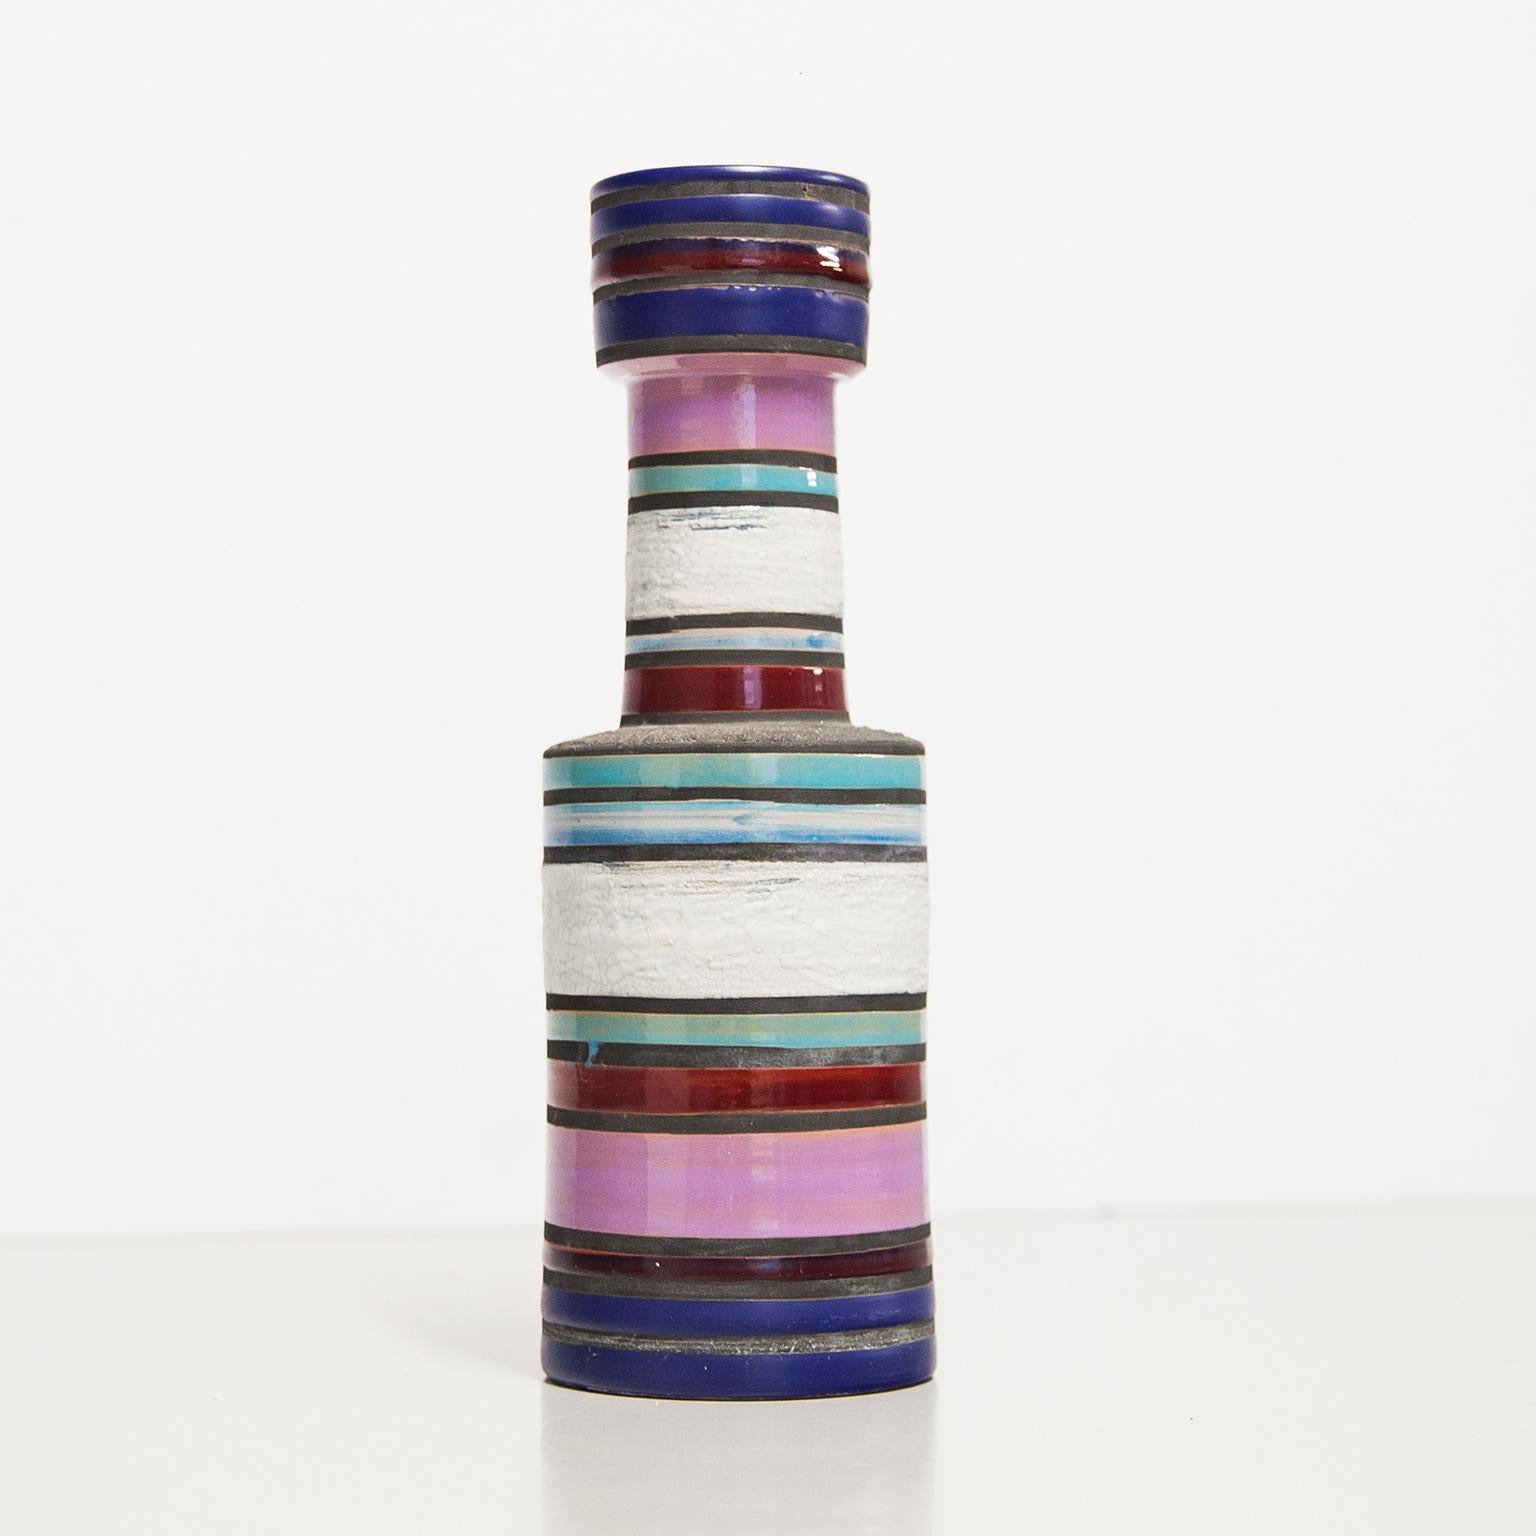 Aldo Londi Bitossi Raymor ceramic vase stripes pottery signed, Italy, 1960s, stoneware Cambogia vase in vibrant bands of turquoise, violet, pink, light and dark blue and a textured black. Signed beneath the glaze on the underside.

